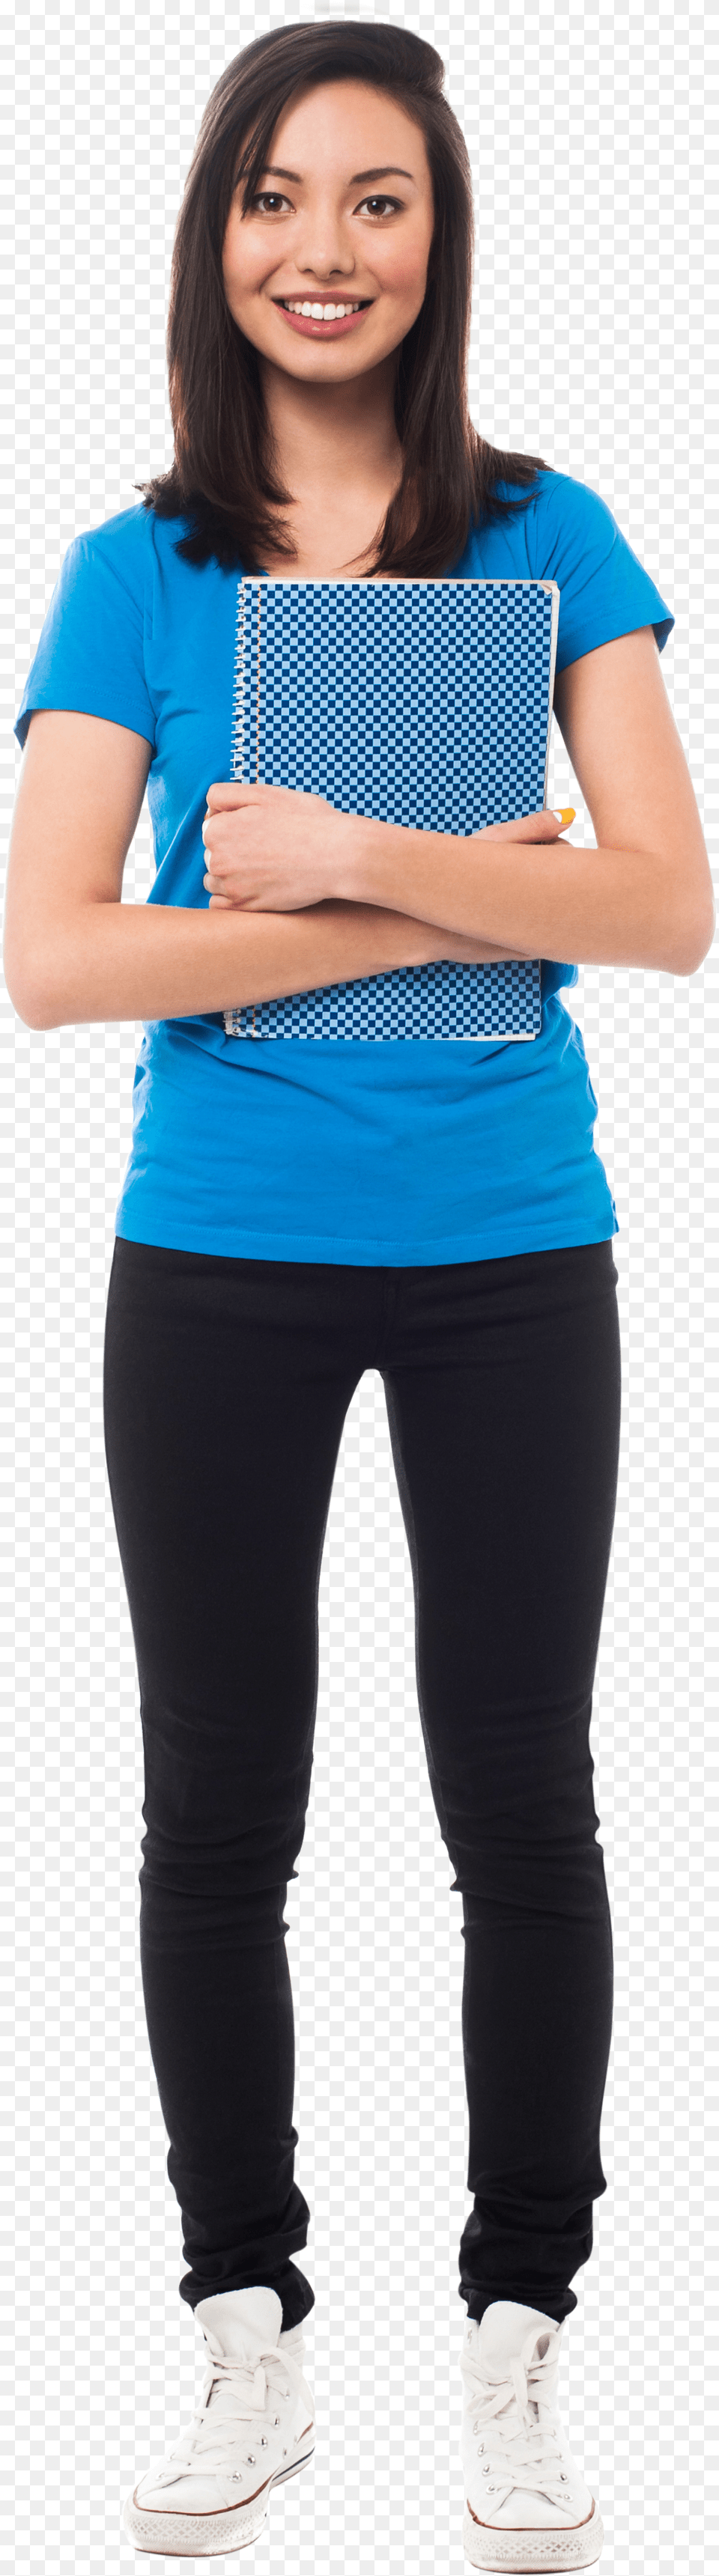 Woman Student Stock Photo Standing Girl Png Image